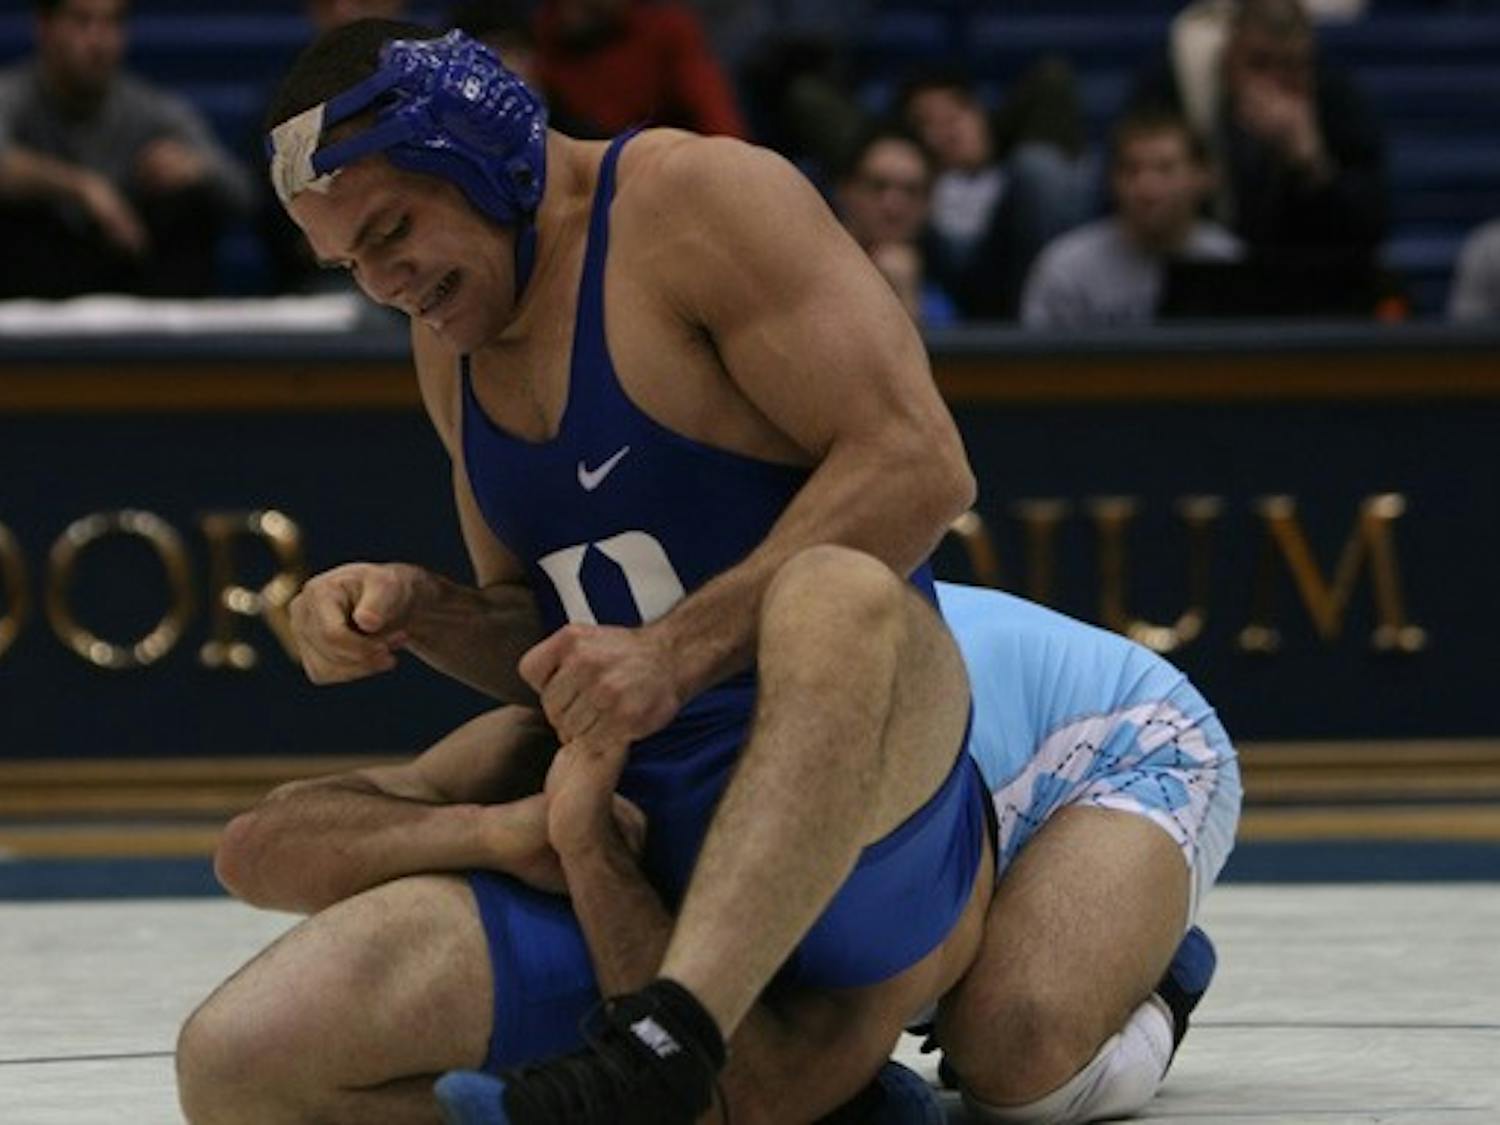 Redshirt sophomore Diego Bencomo picked up one of Duke’s four match victories Thursday night, defeating his opponent 4-1.